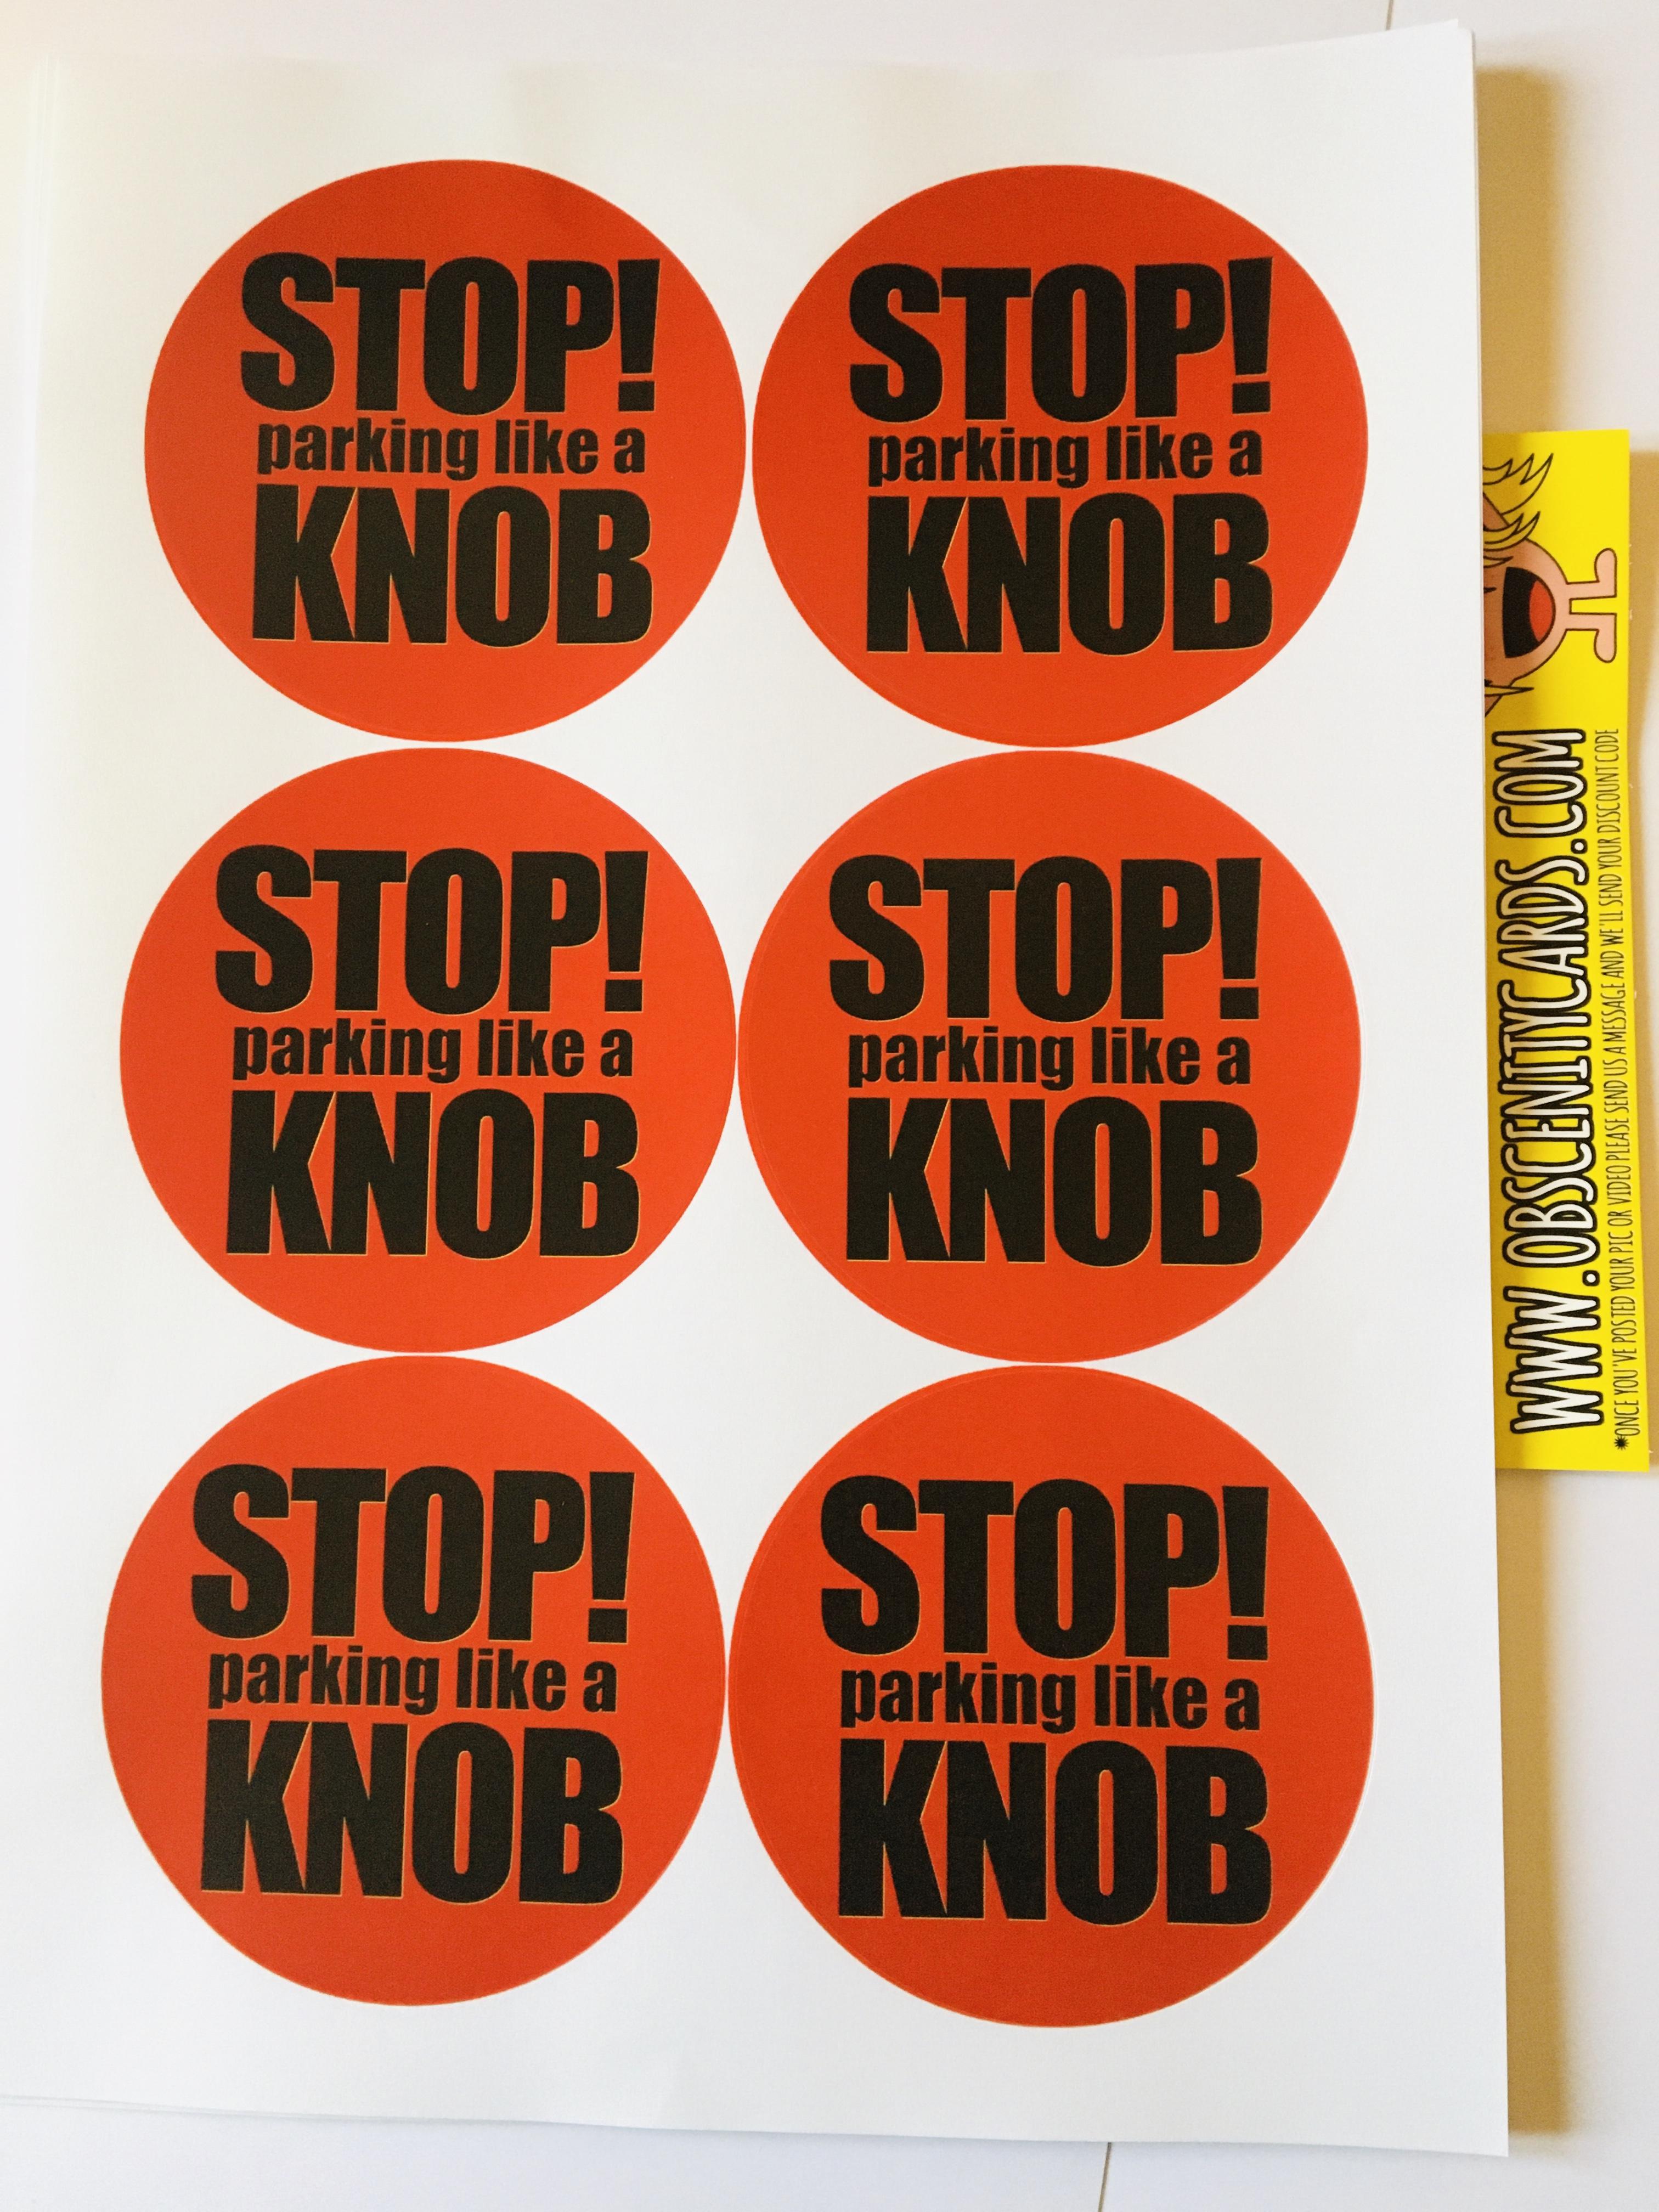 STOP PARKING LIKE A KNOB STICKERS!